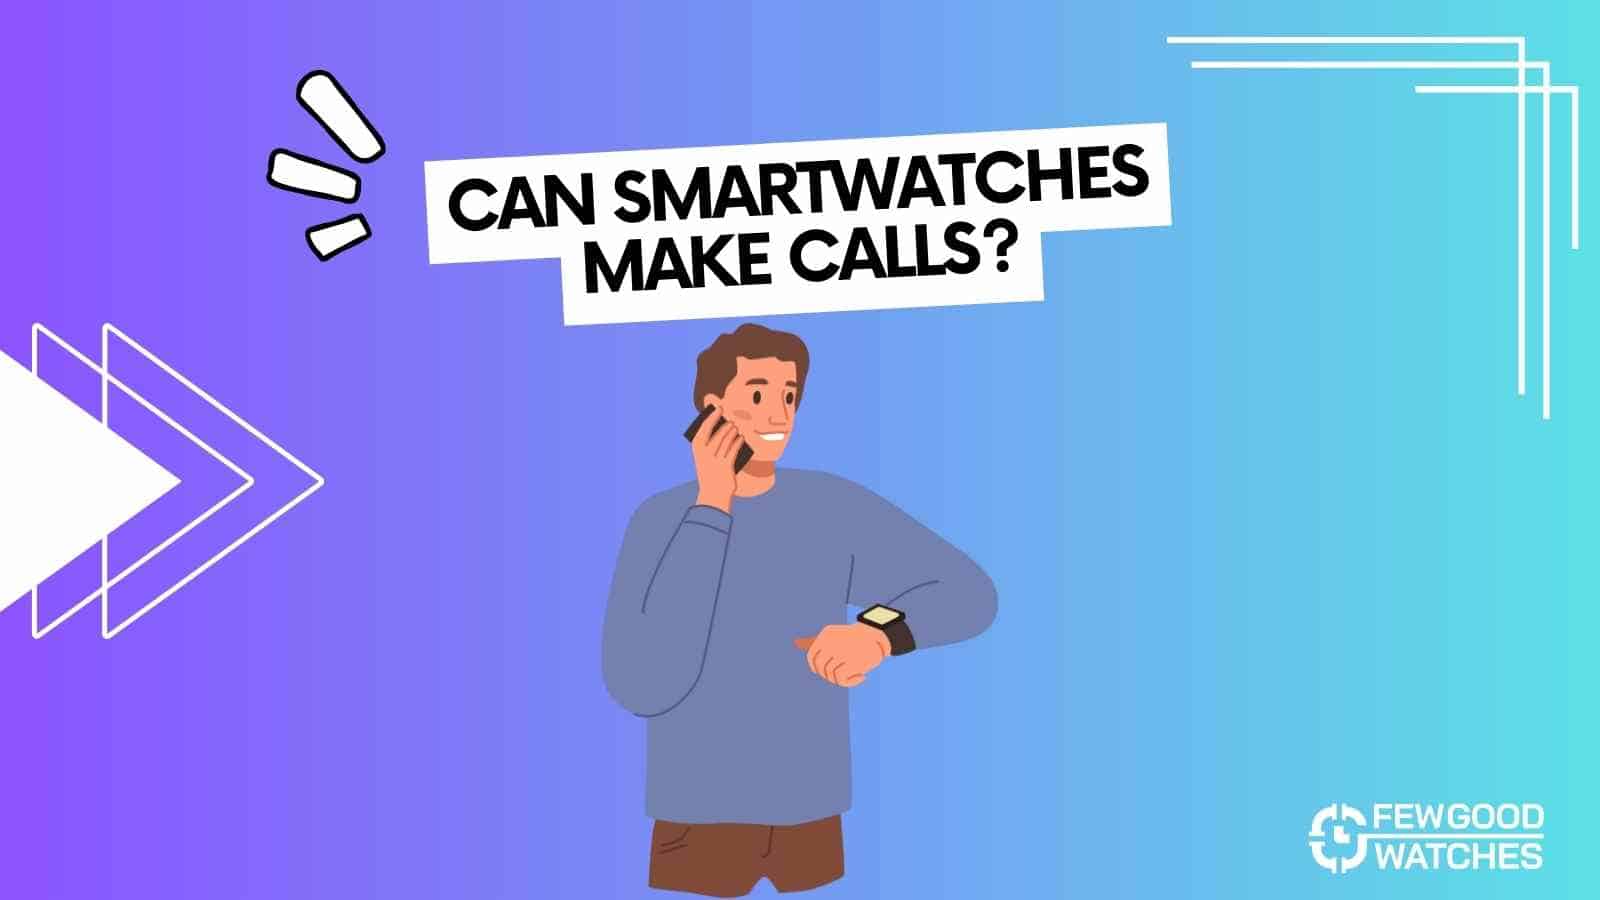 Can smartwatches make phone calls - answered